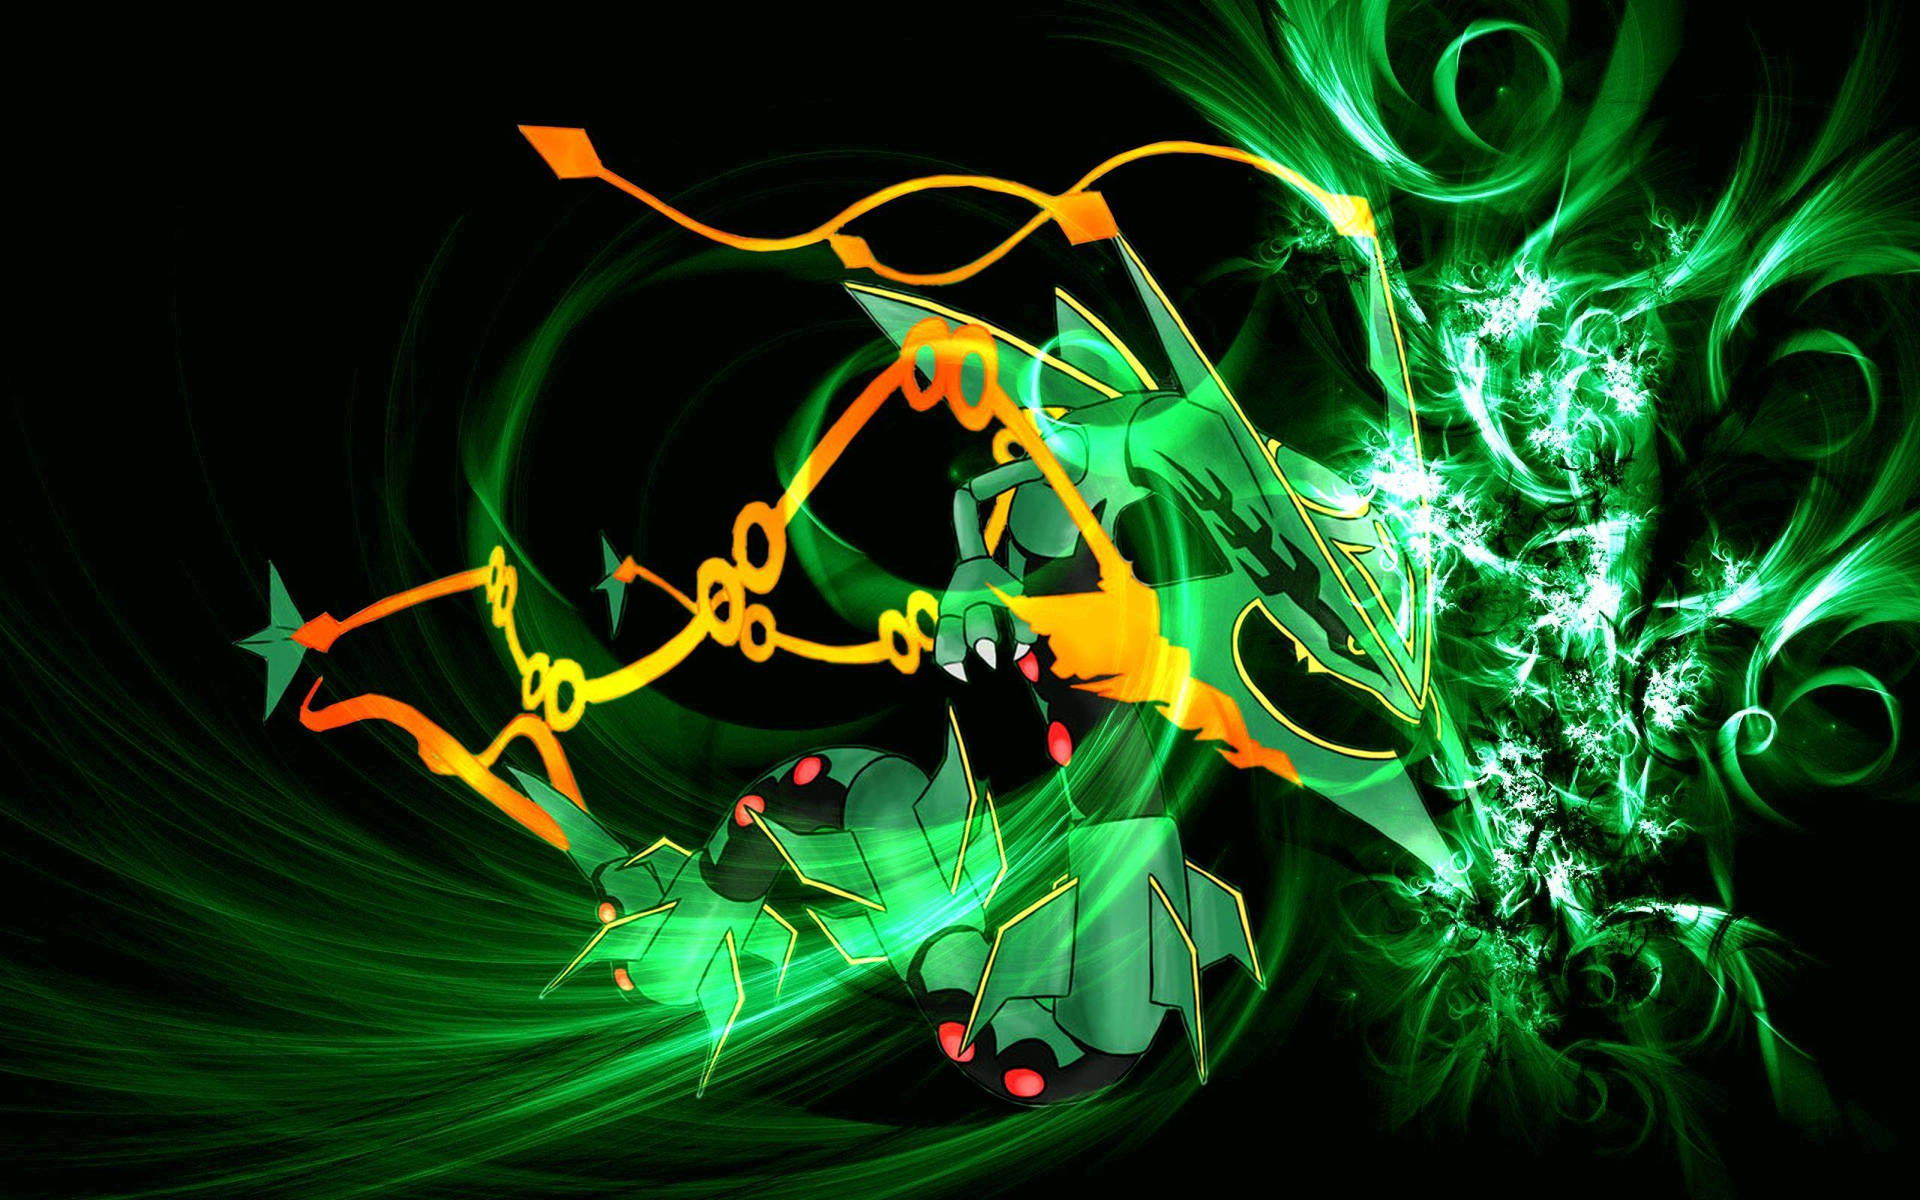 Rayquaza Shines In A Brilliant Display Of Green Flares And Sparks Background